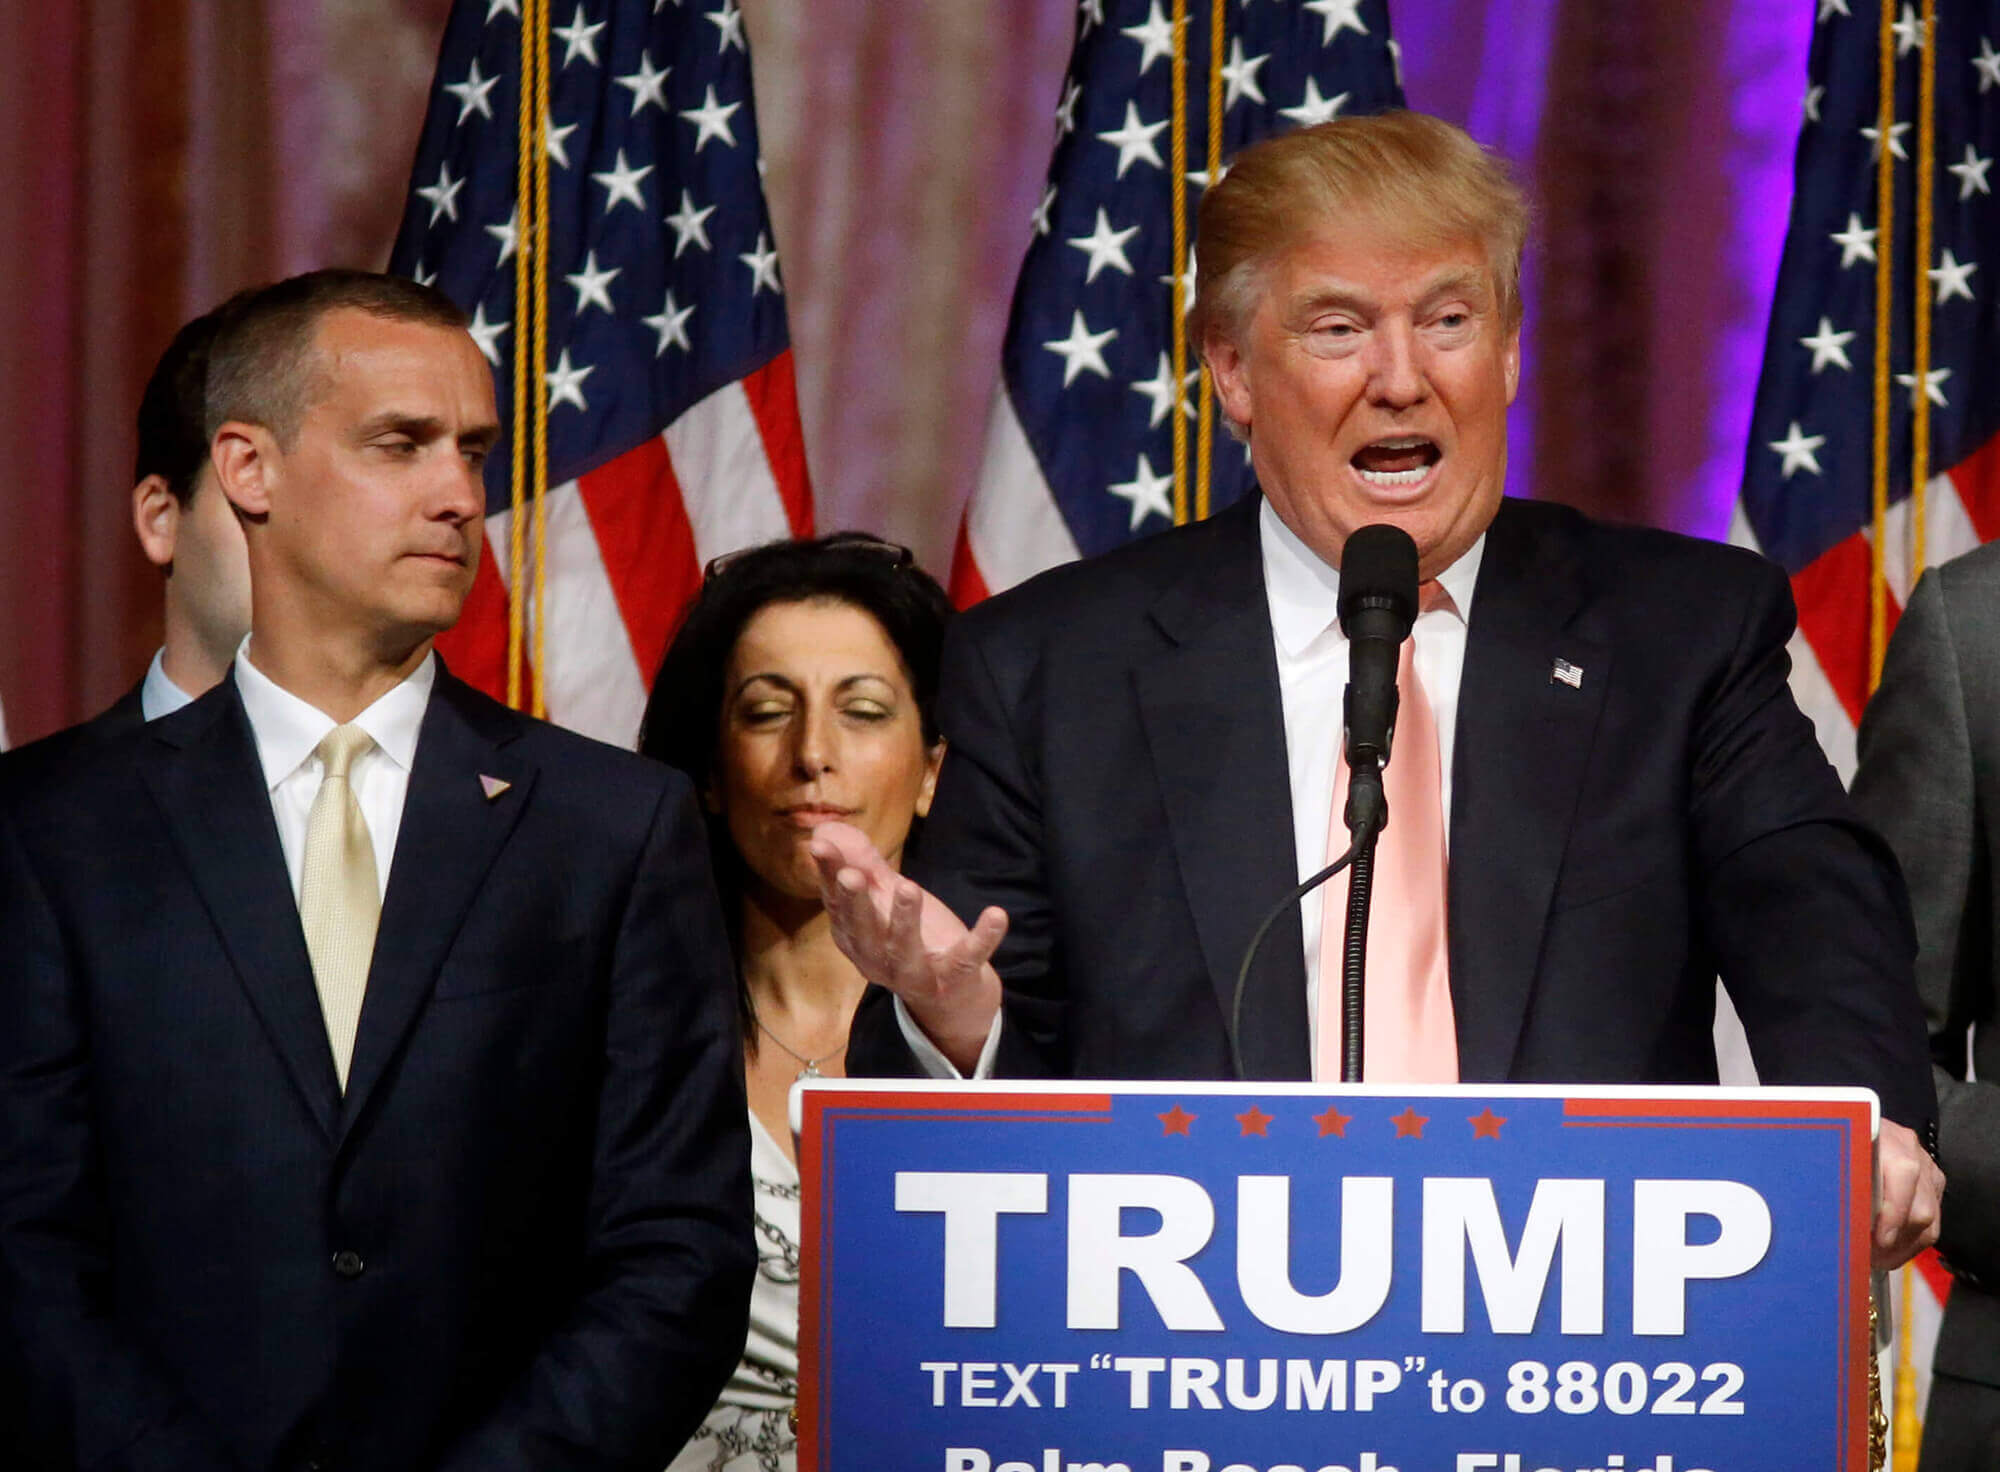 Image of Trump speaking at a campaign event with Corey Lewandowski beside him.